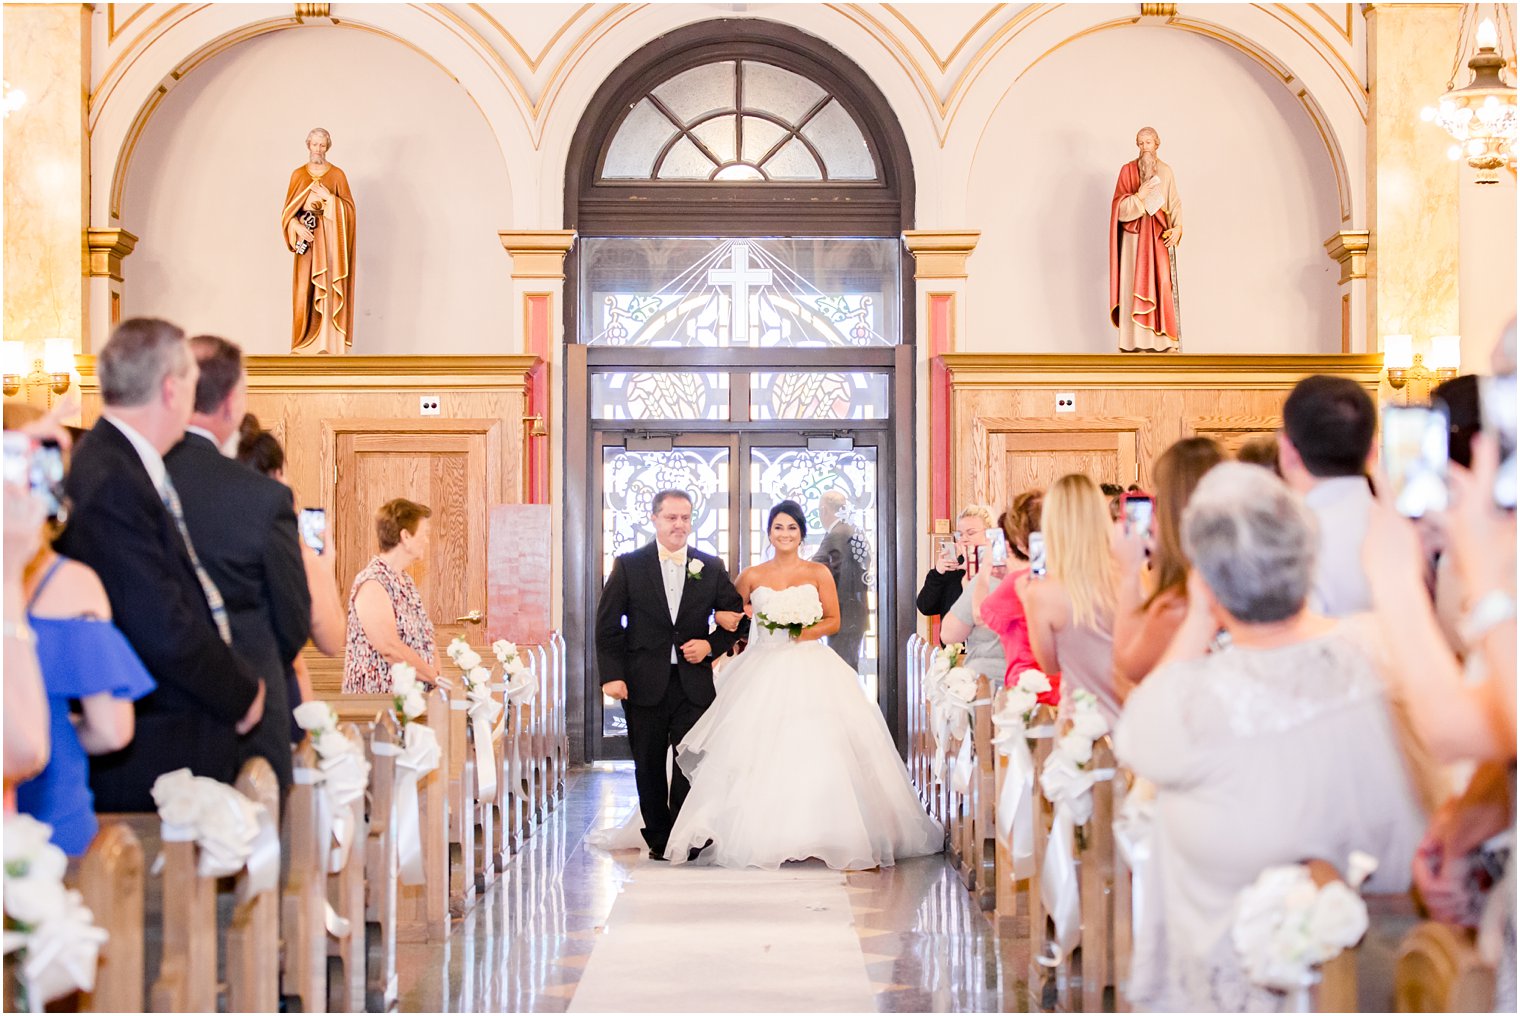 Bride processing with her father at St. Finbar Catholic Church